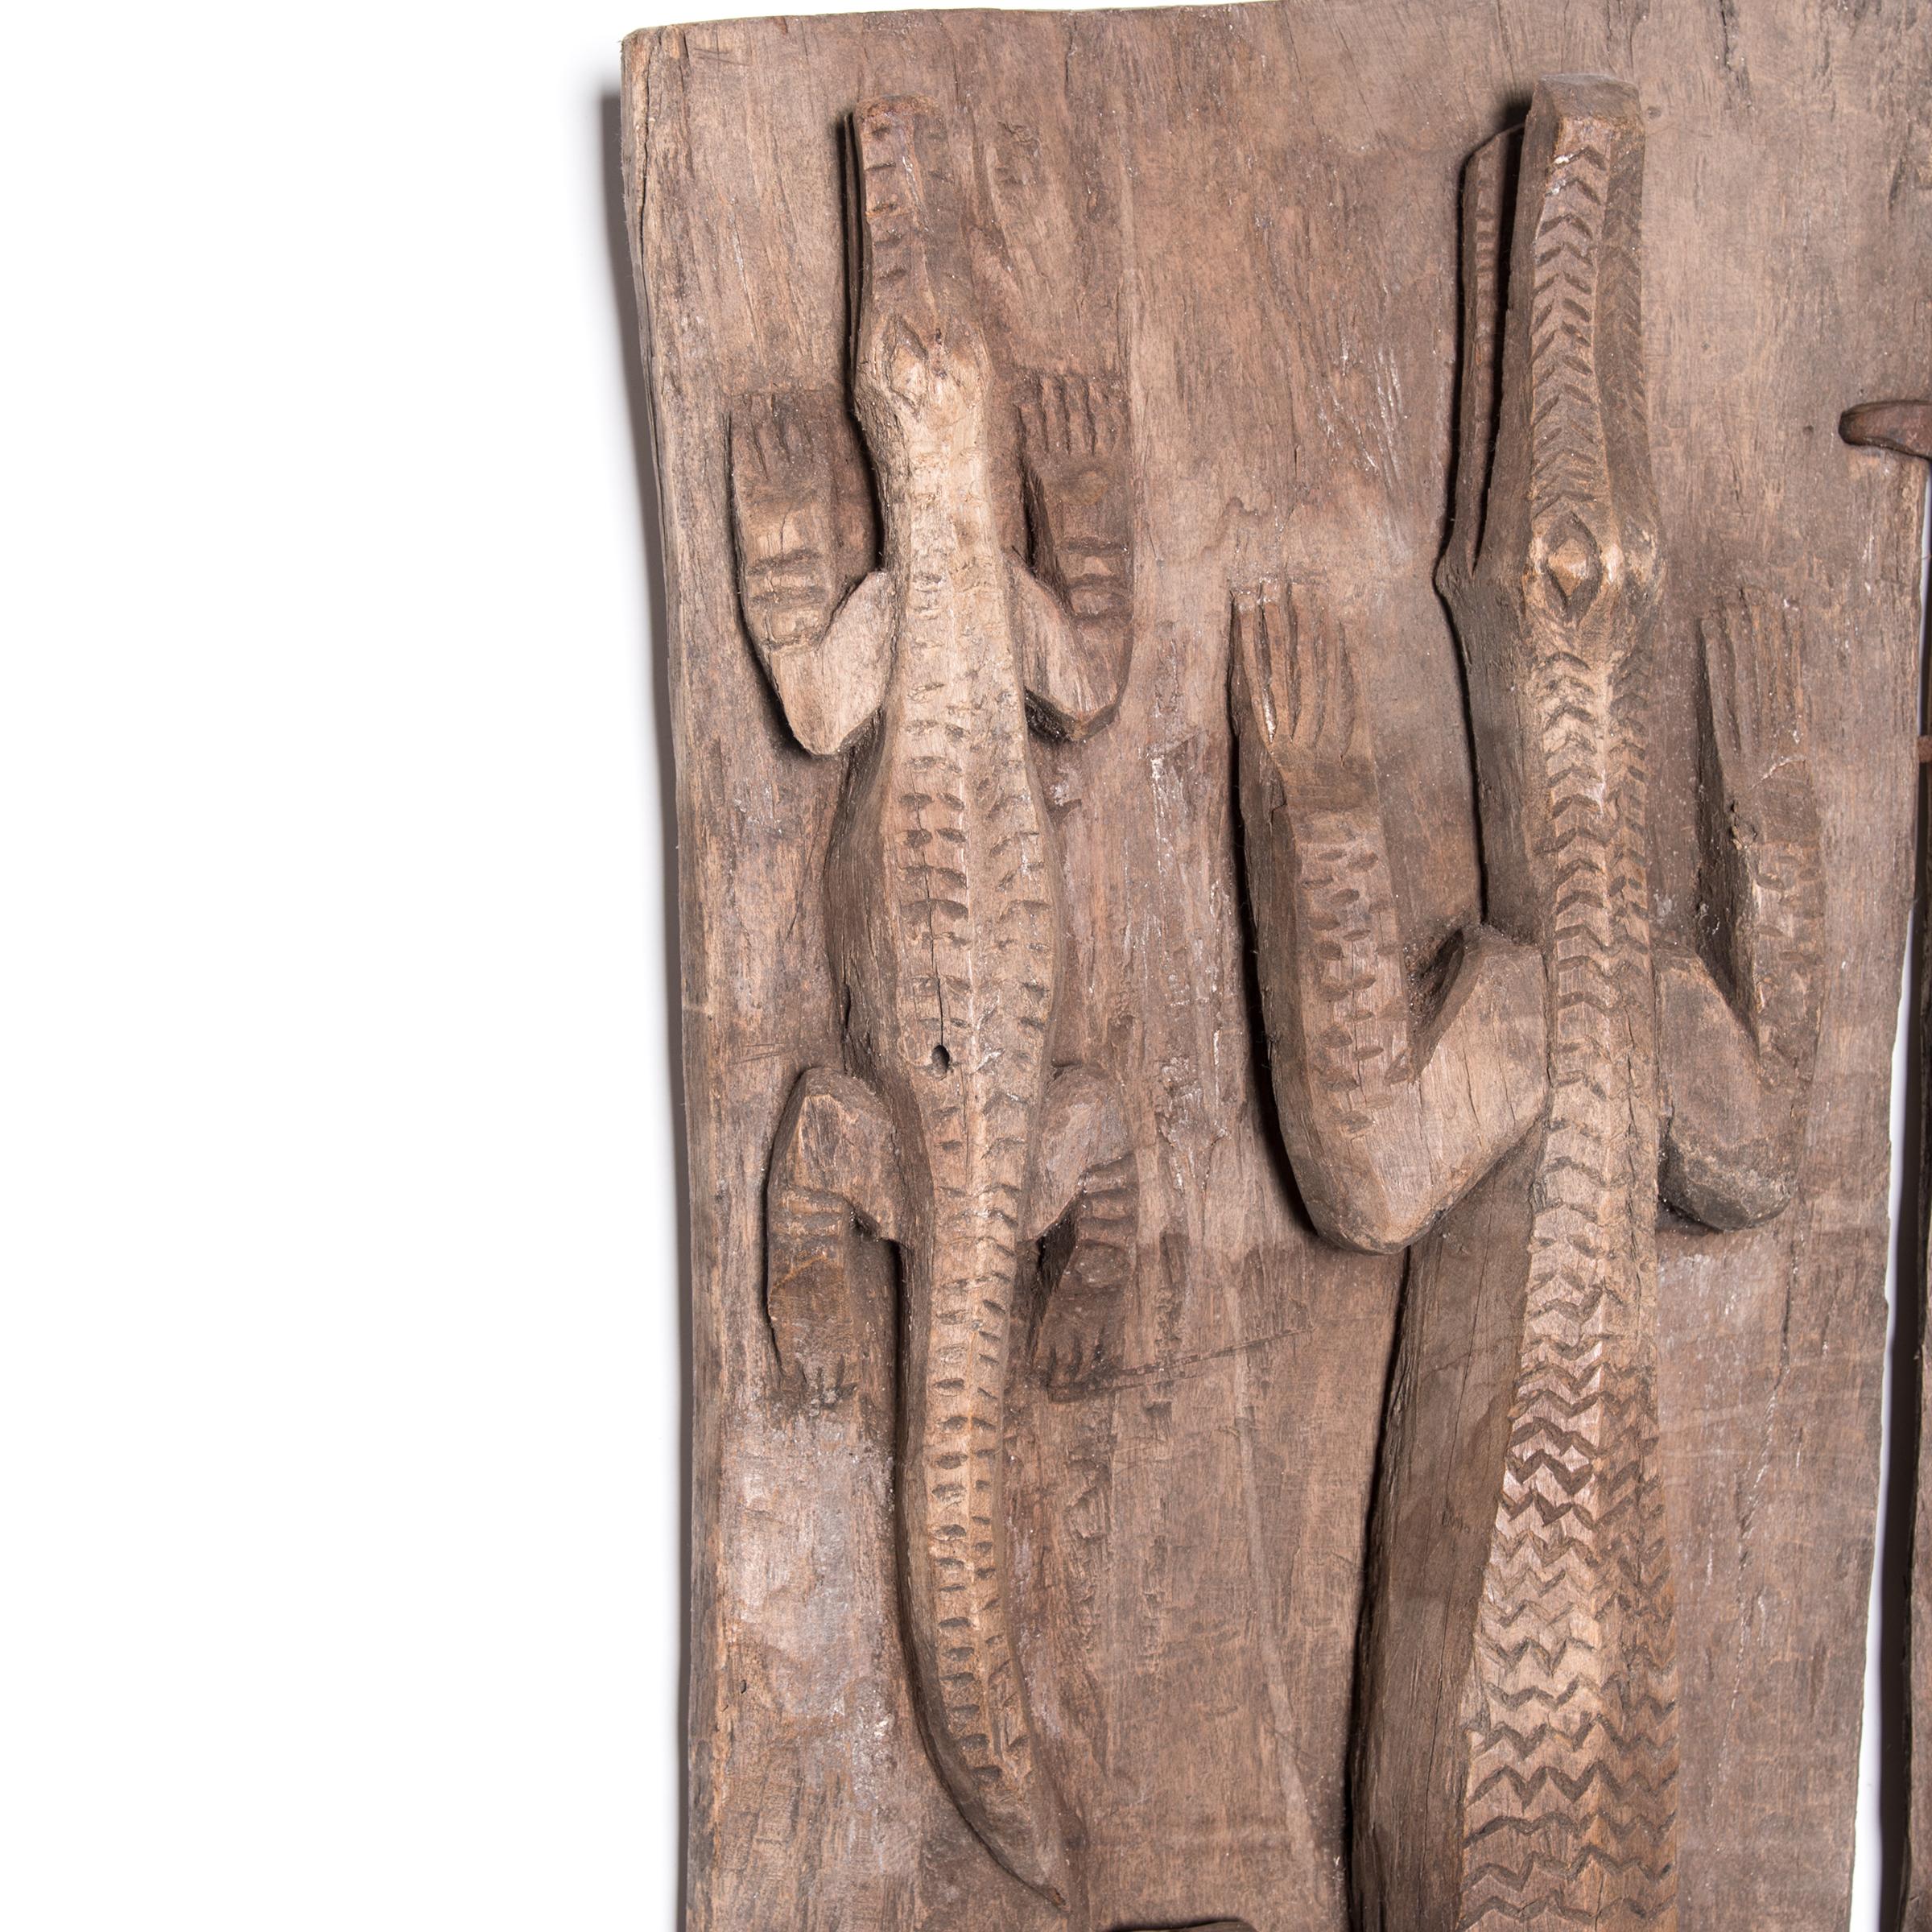 Carved directly out of the wood slating, these reptiles come to life, appearing to crawl up the door. Intricately textured with abstract patterns, the crawling reptiles bring a dynamic sense of movement to the otherwise rigid plank door. A crossbar